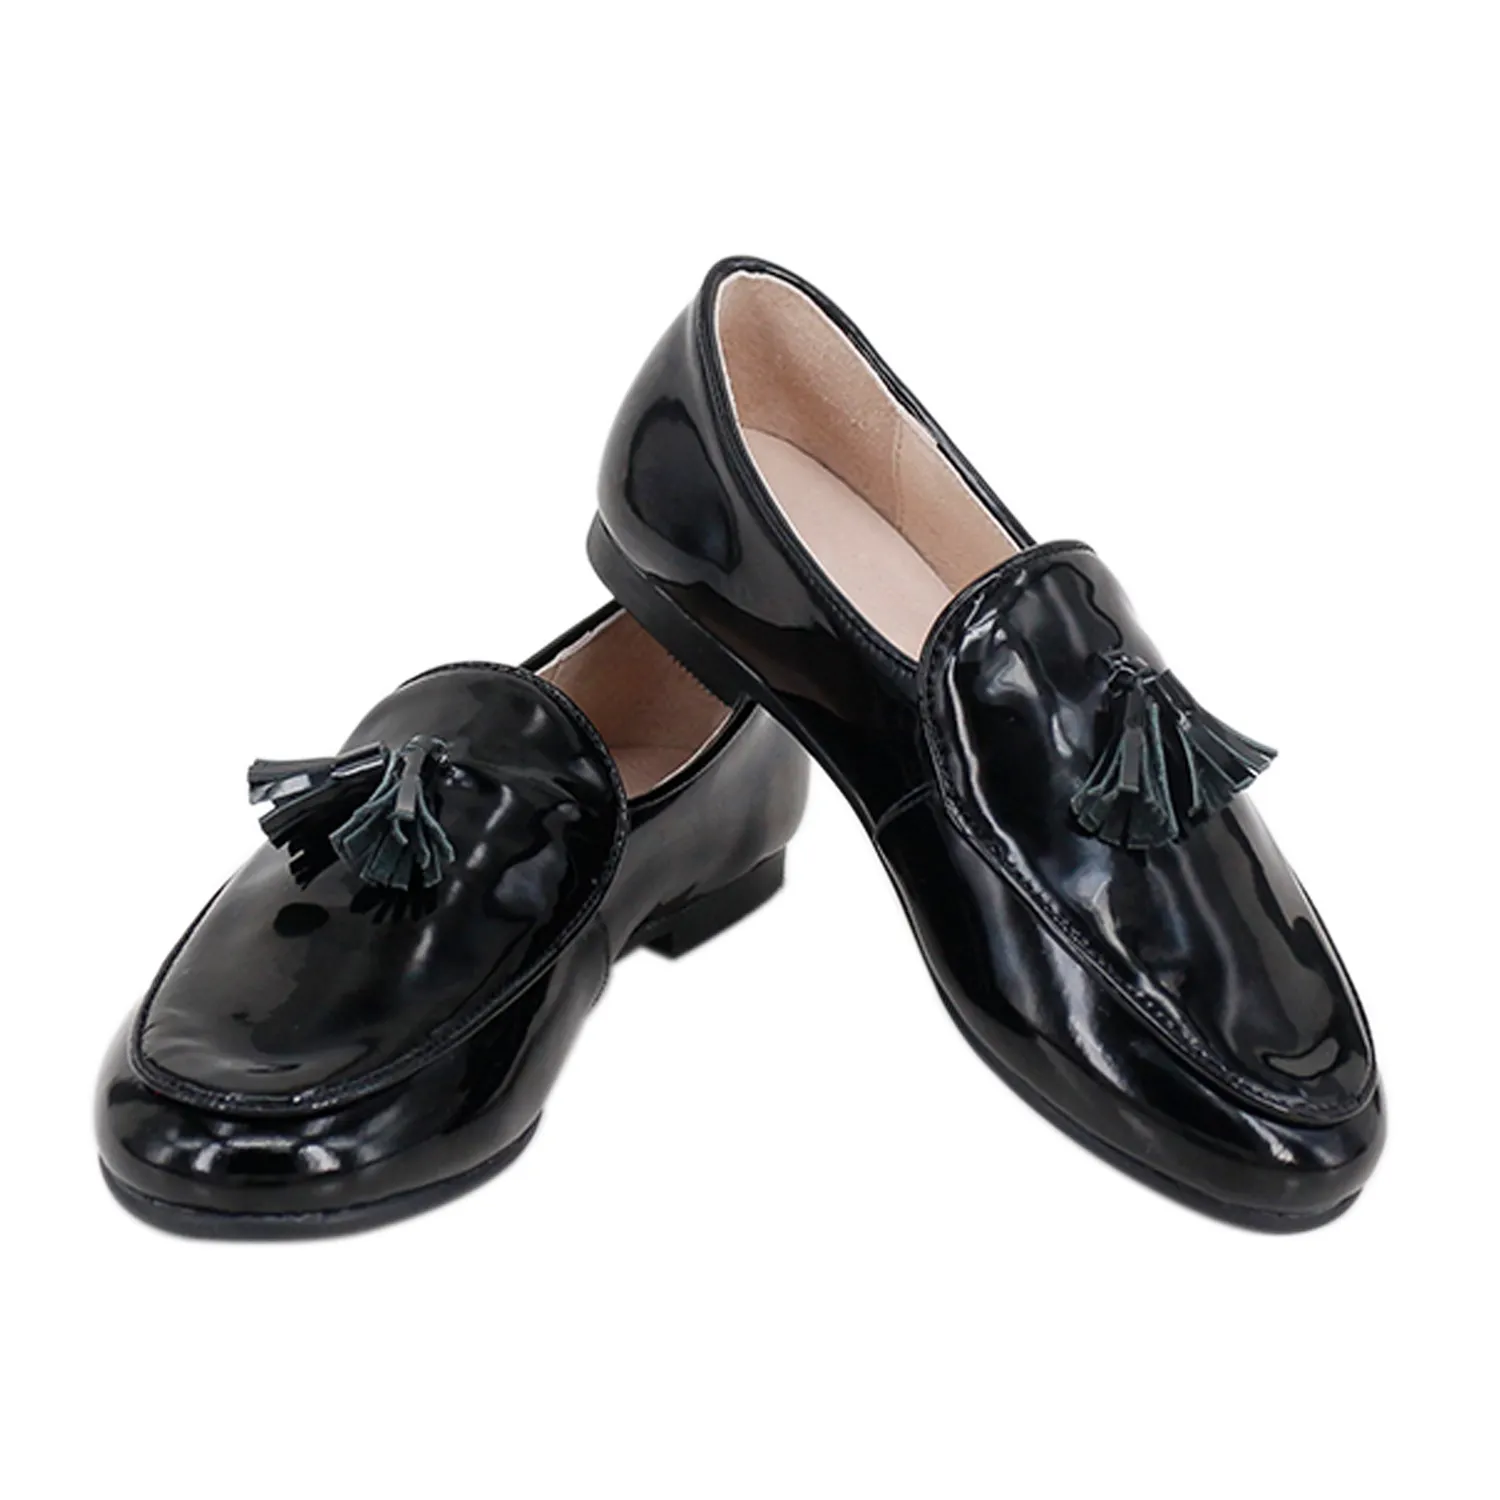 2023 Latest high quality handmade glossy genuine leather soft rubber base casual black color loafers shoes for men